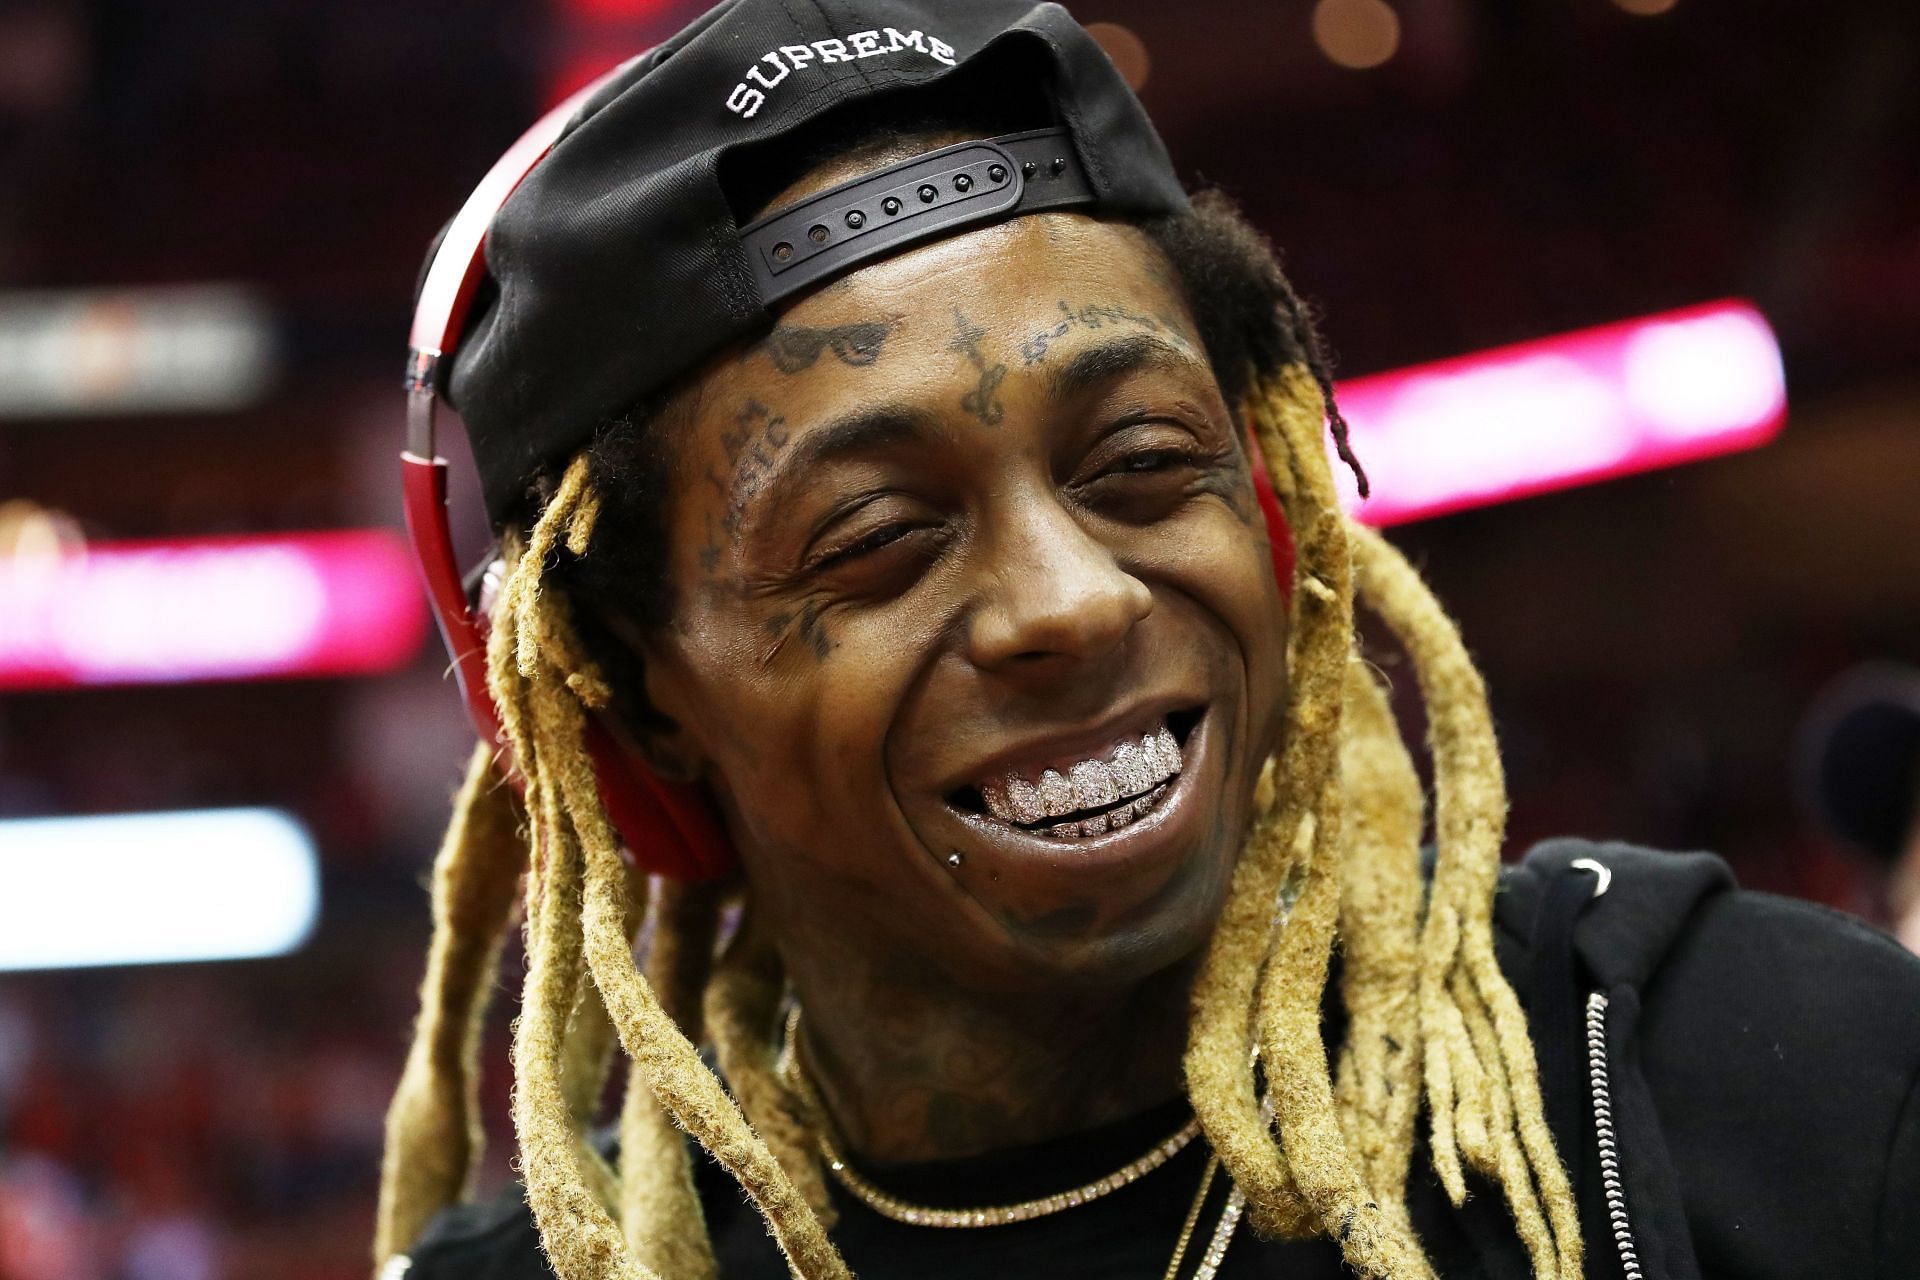 Lil Wayne while attending an NBA playoff game